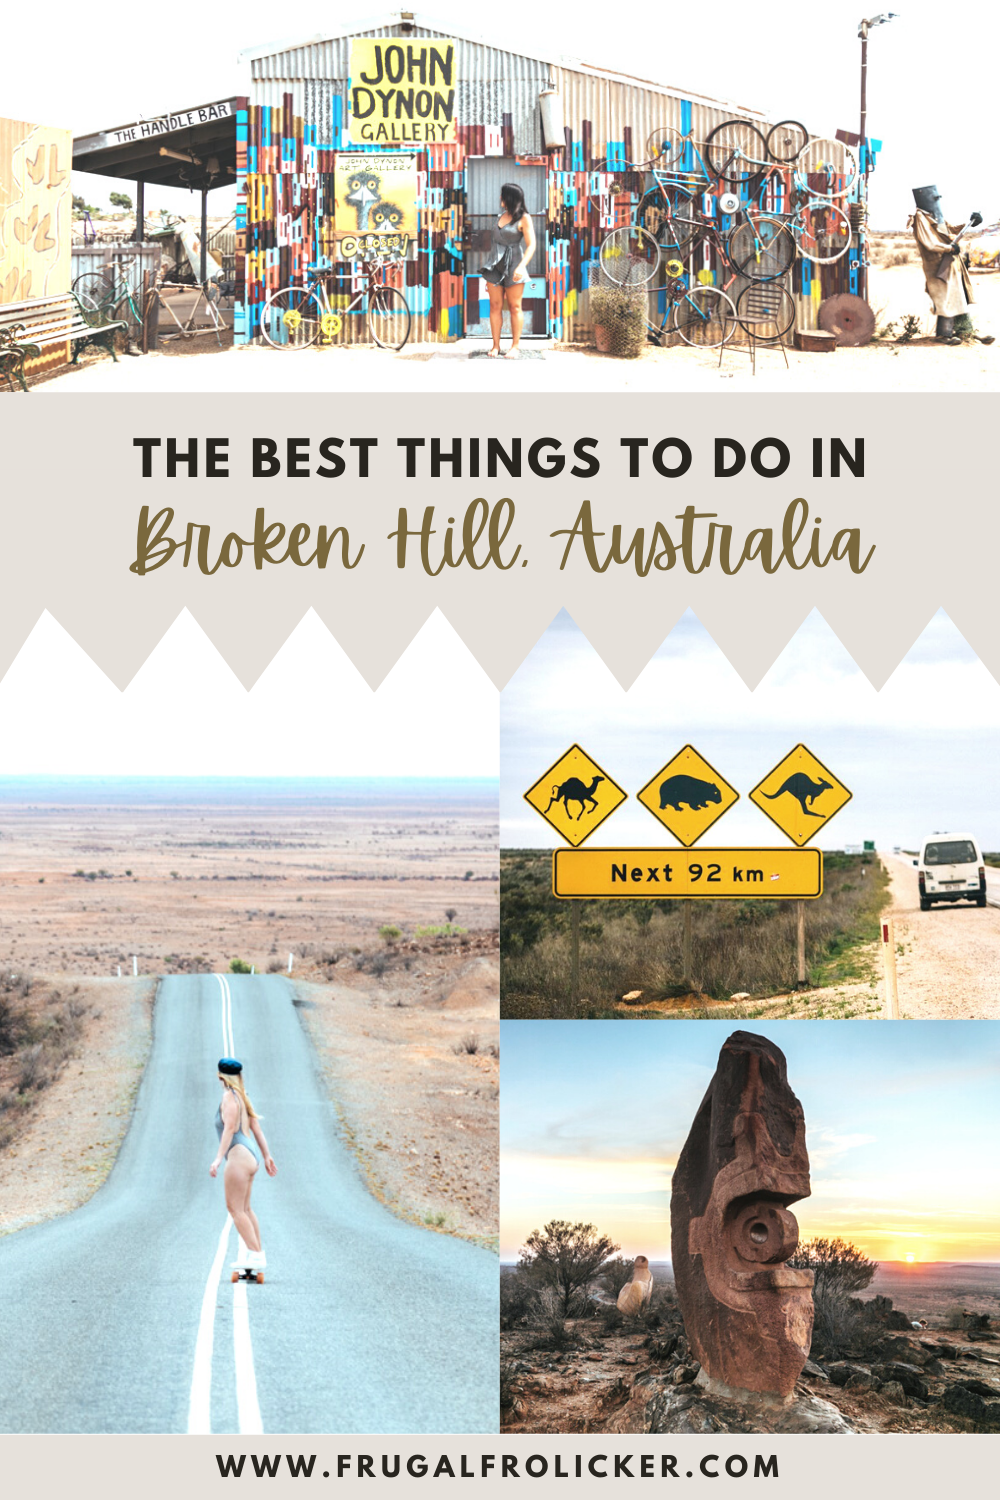 Best Things to do in Broken Hill